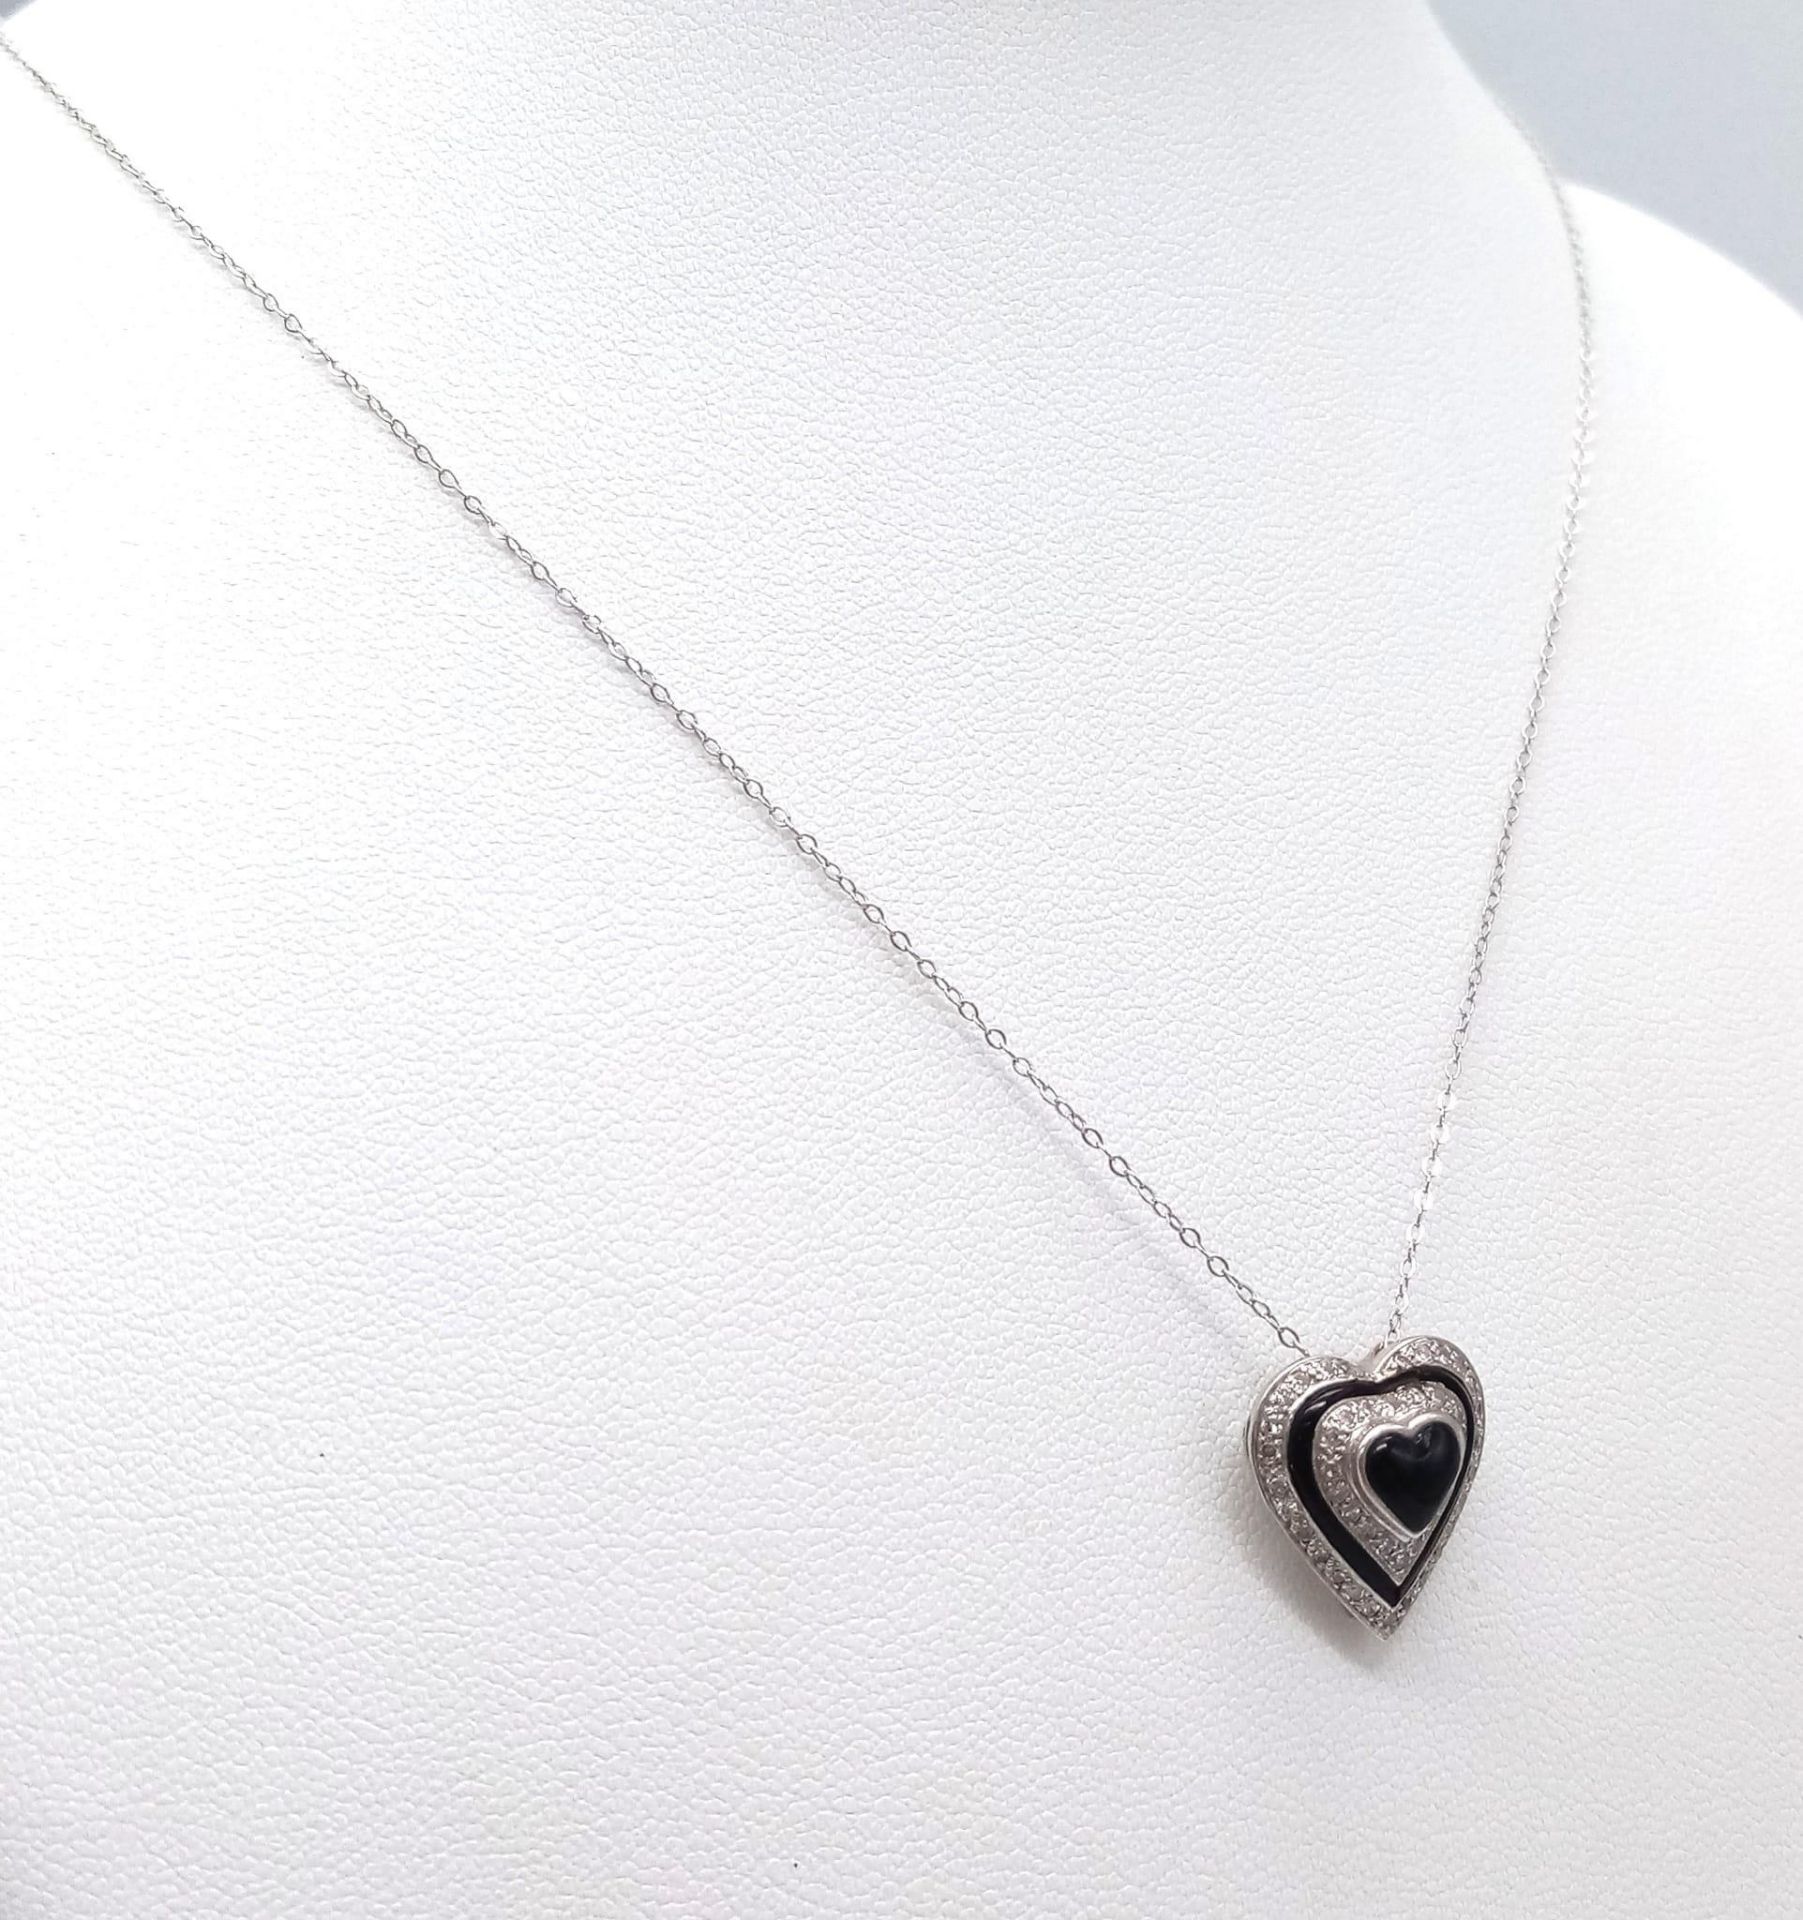 An 18K White Gold Diamond and Black Onyx Heart Pendant on a 9K White Gold Disappearing Necklace. - Image 3 of 6